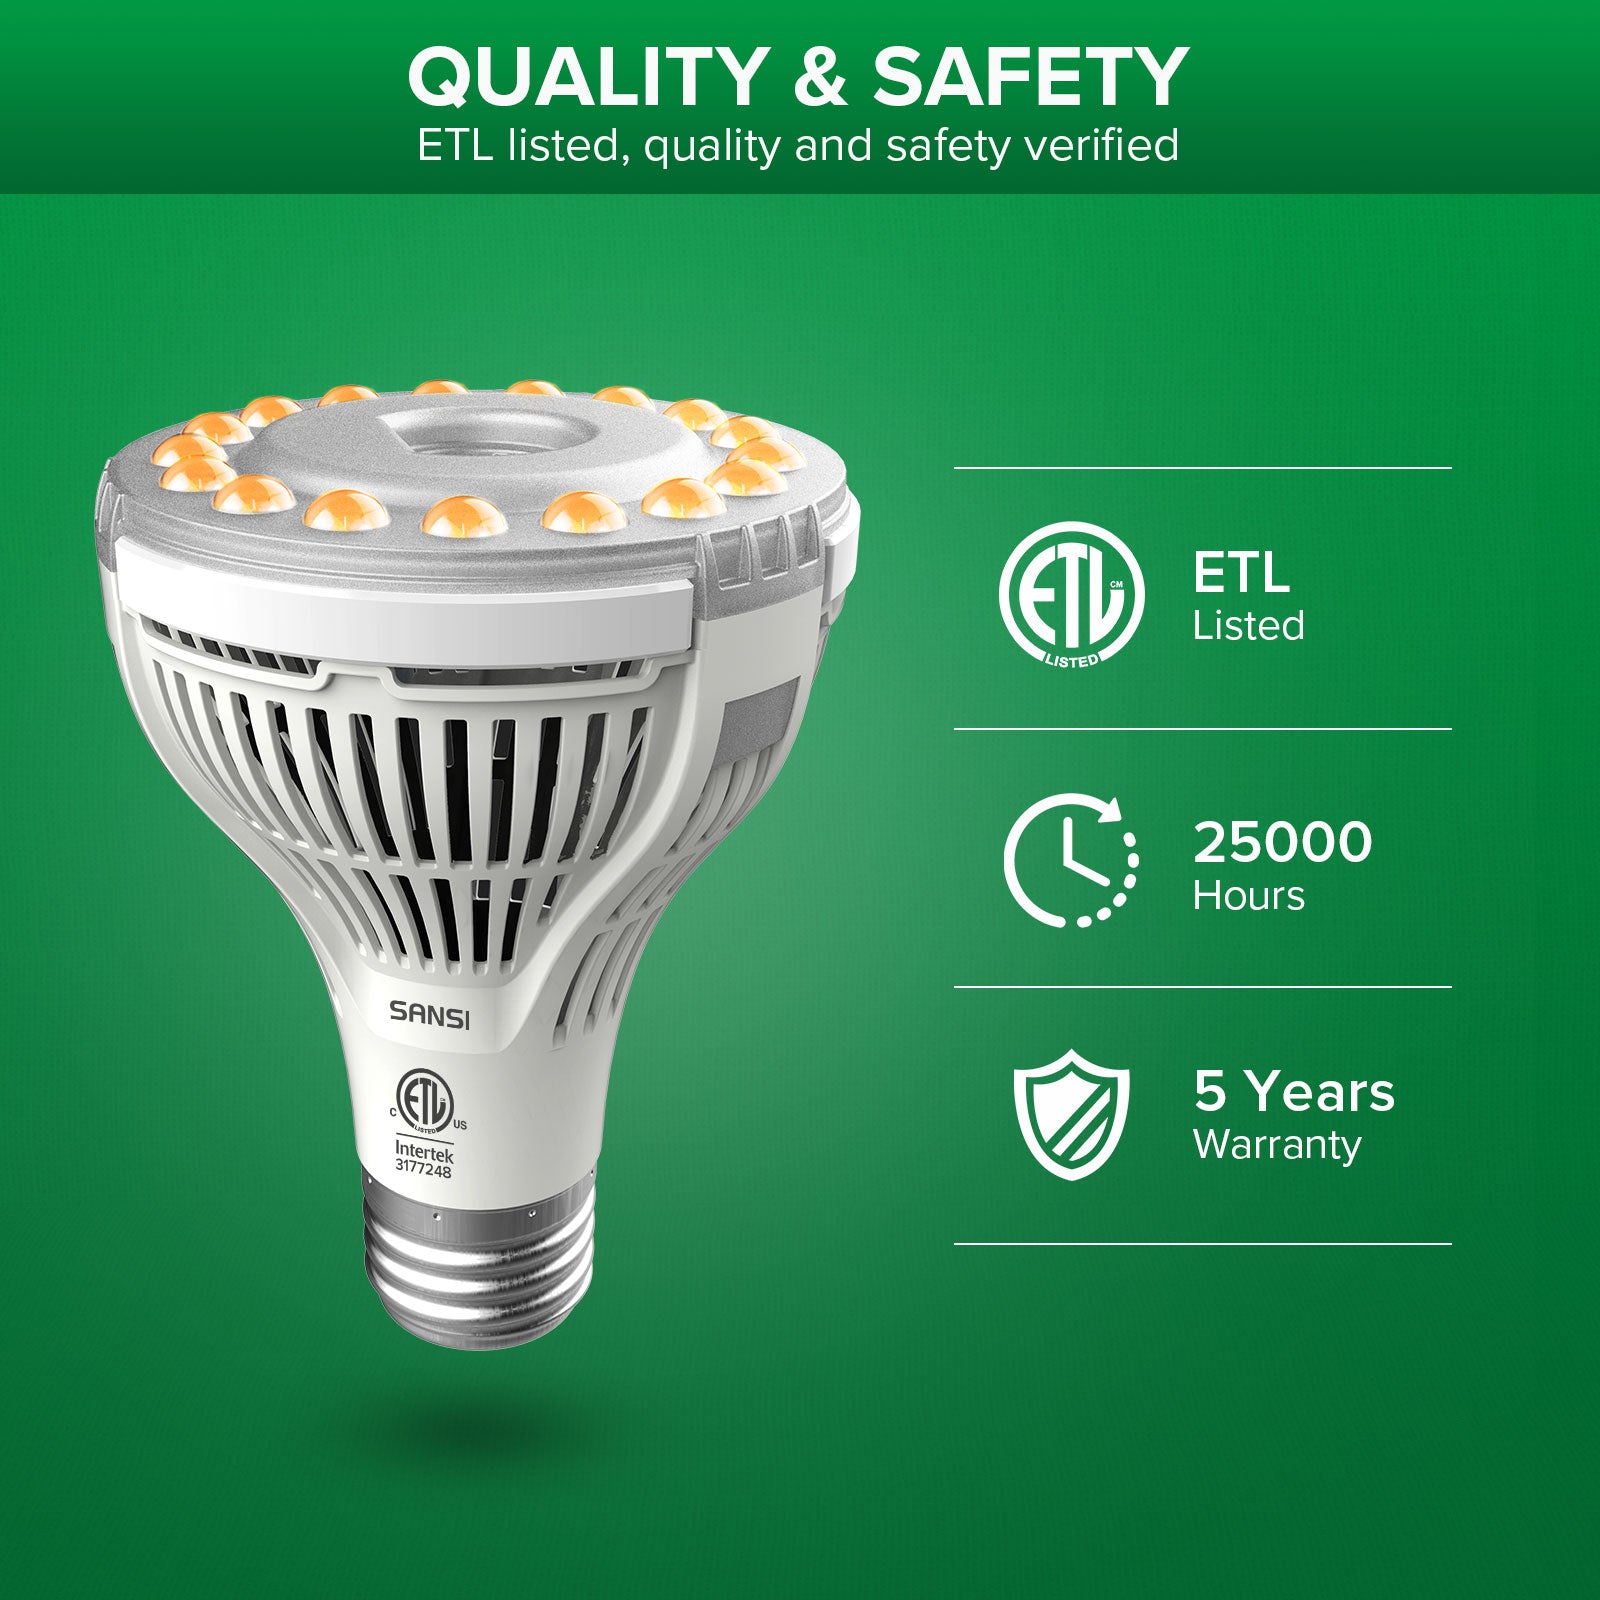 PAR25 10W Smart Grow Light Bulb with APP Control has ELT listed, quality and safety verified, 25000 hours, 5-year waranty